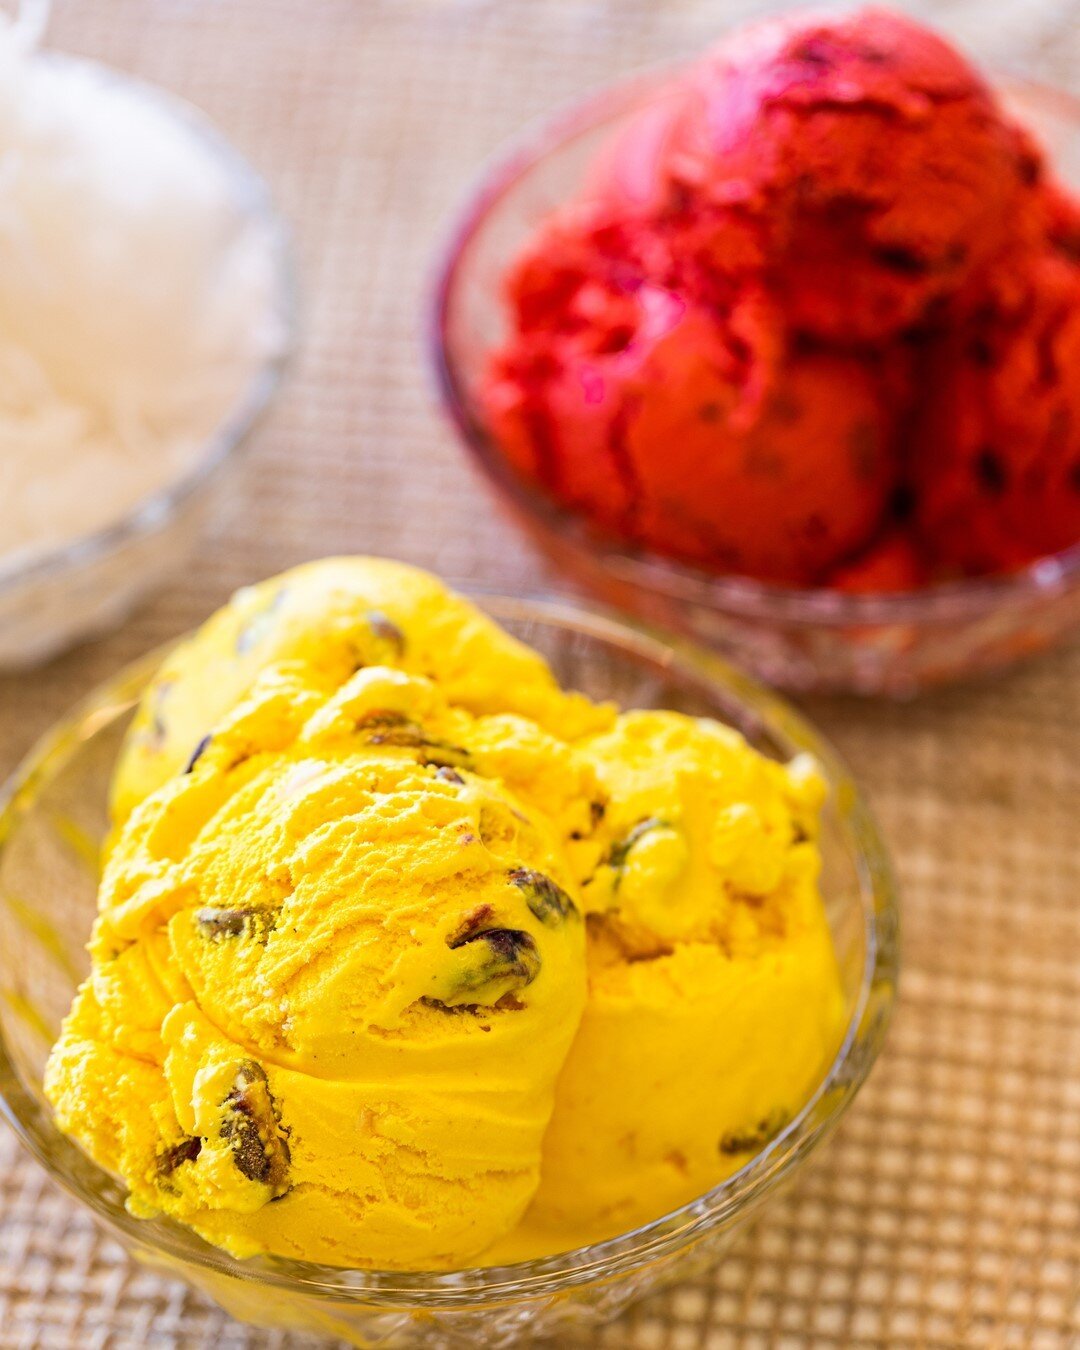 🍨🍨 It&rsquo;s always a good day for ICE CREAM! Especially when it&rsquo;s made FROM SCRATCH! Our Saffron Ice Cream is a Caf&eacute; Glac&eacute; signature item and is absolutely delicious! #CafeGlace